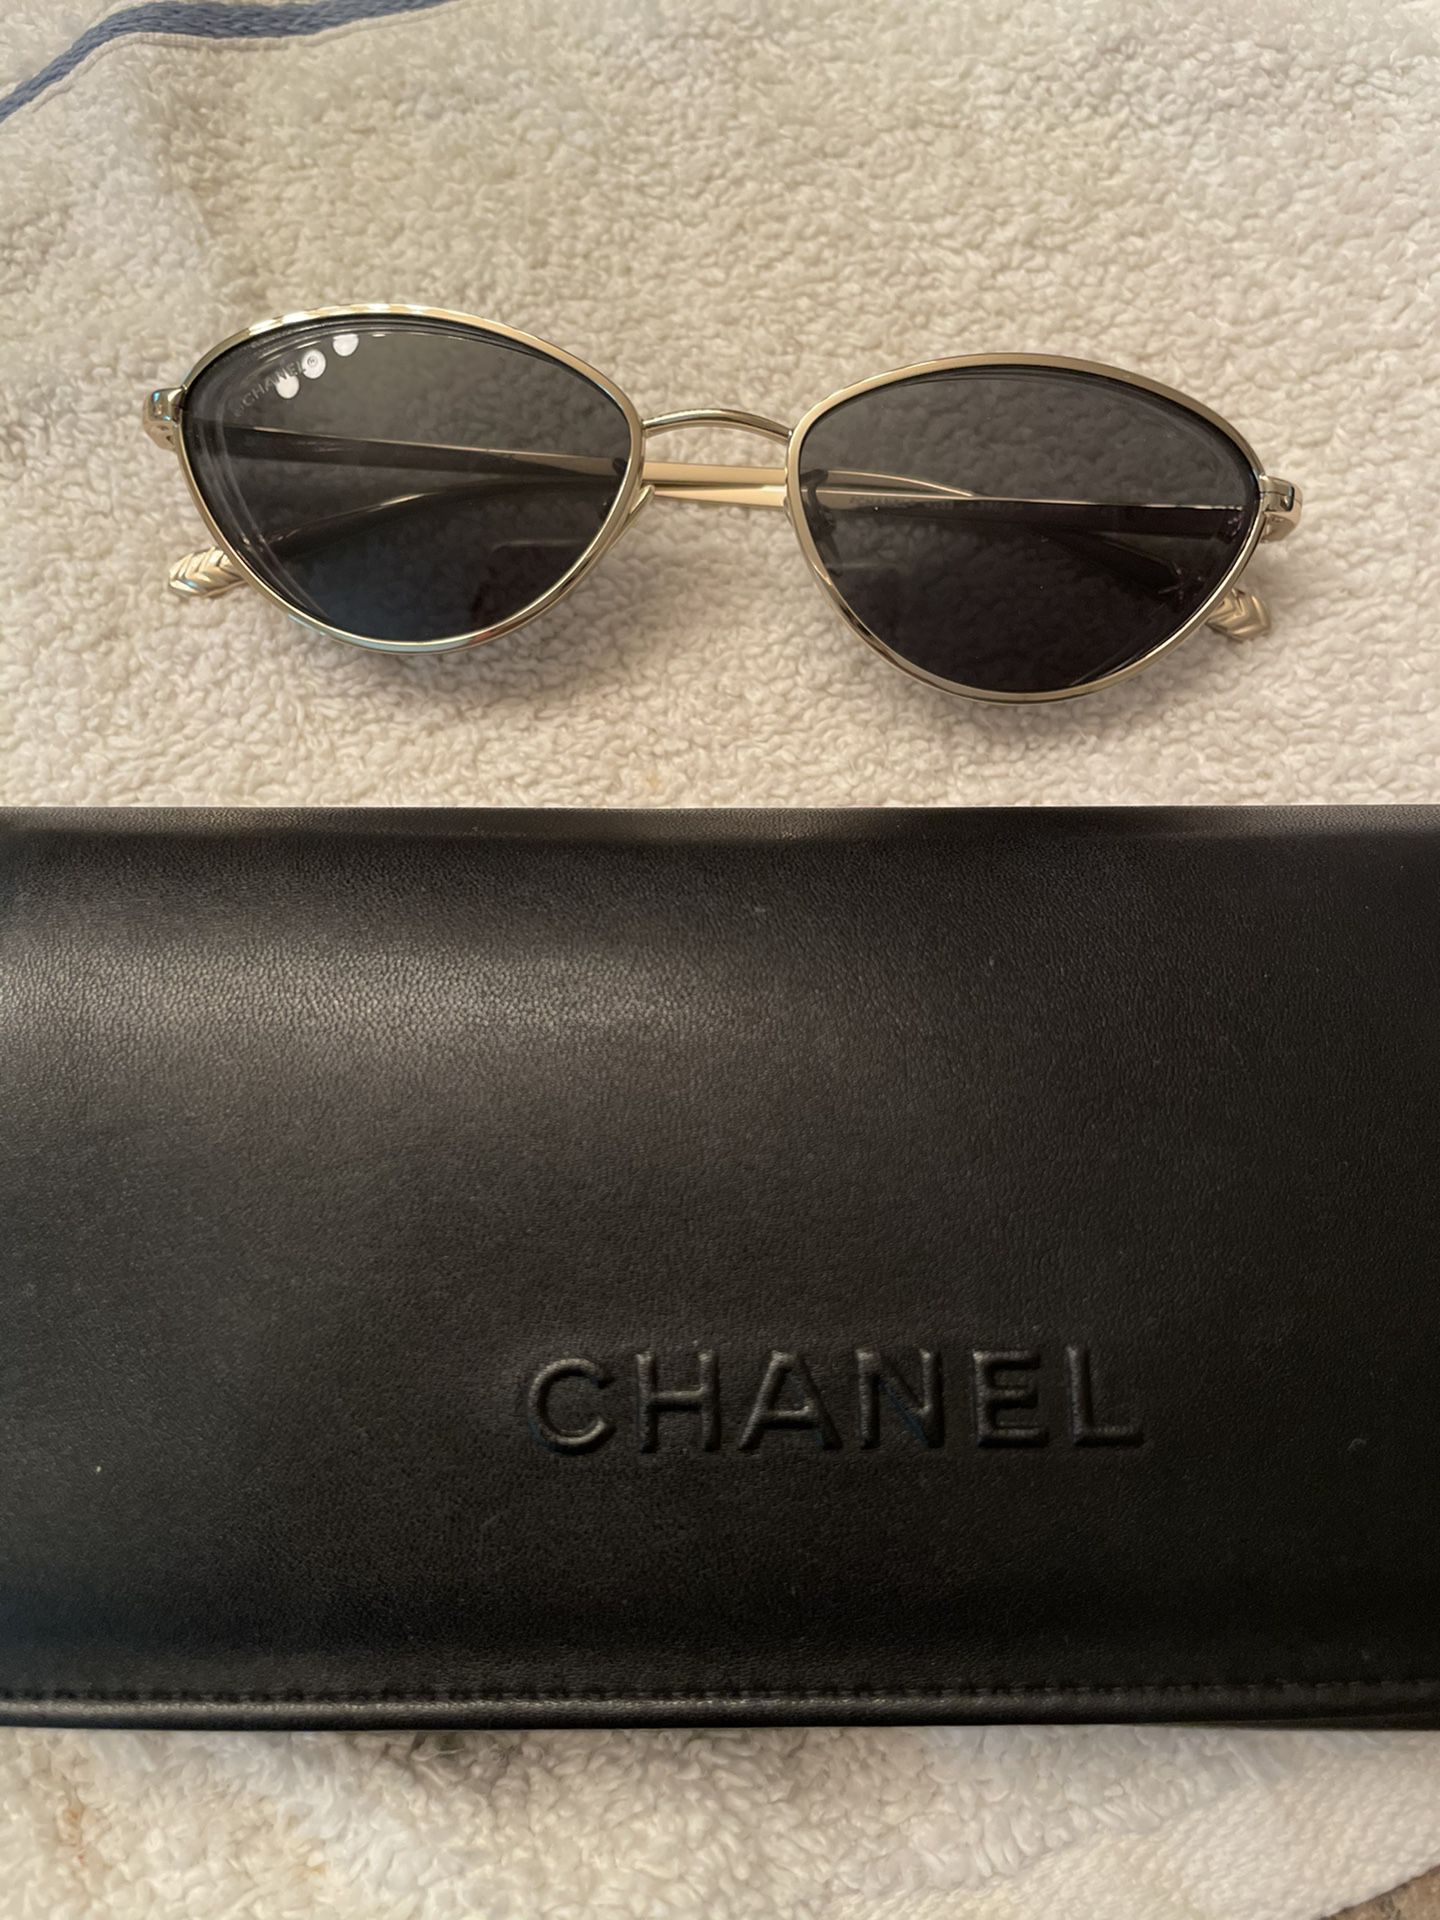 Authentic Chanel Sunglasses for Sale in Lacey, WA - OfferUp